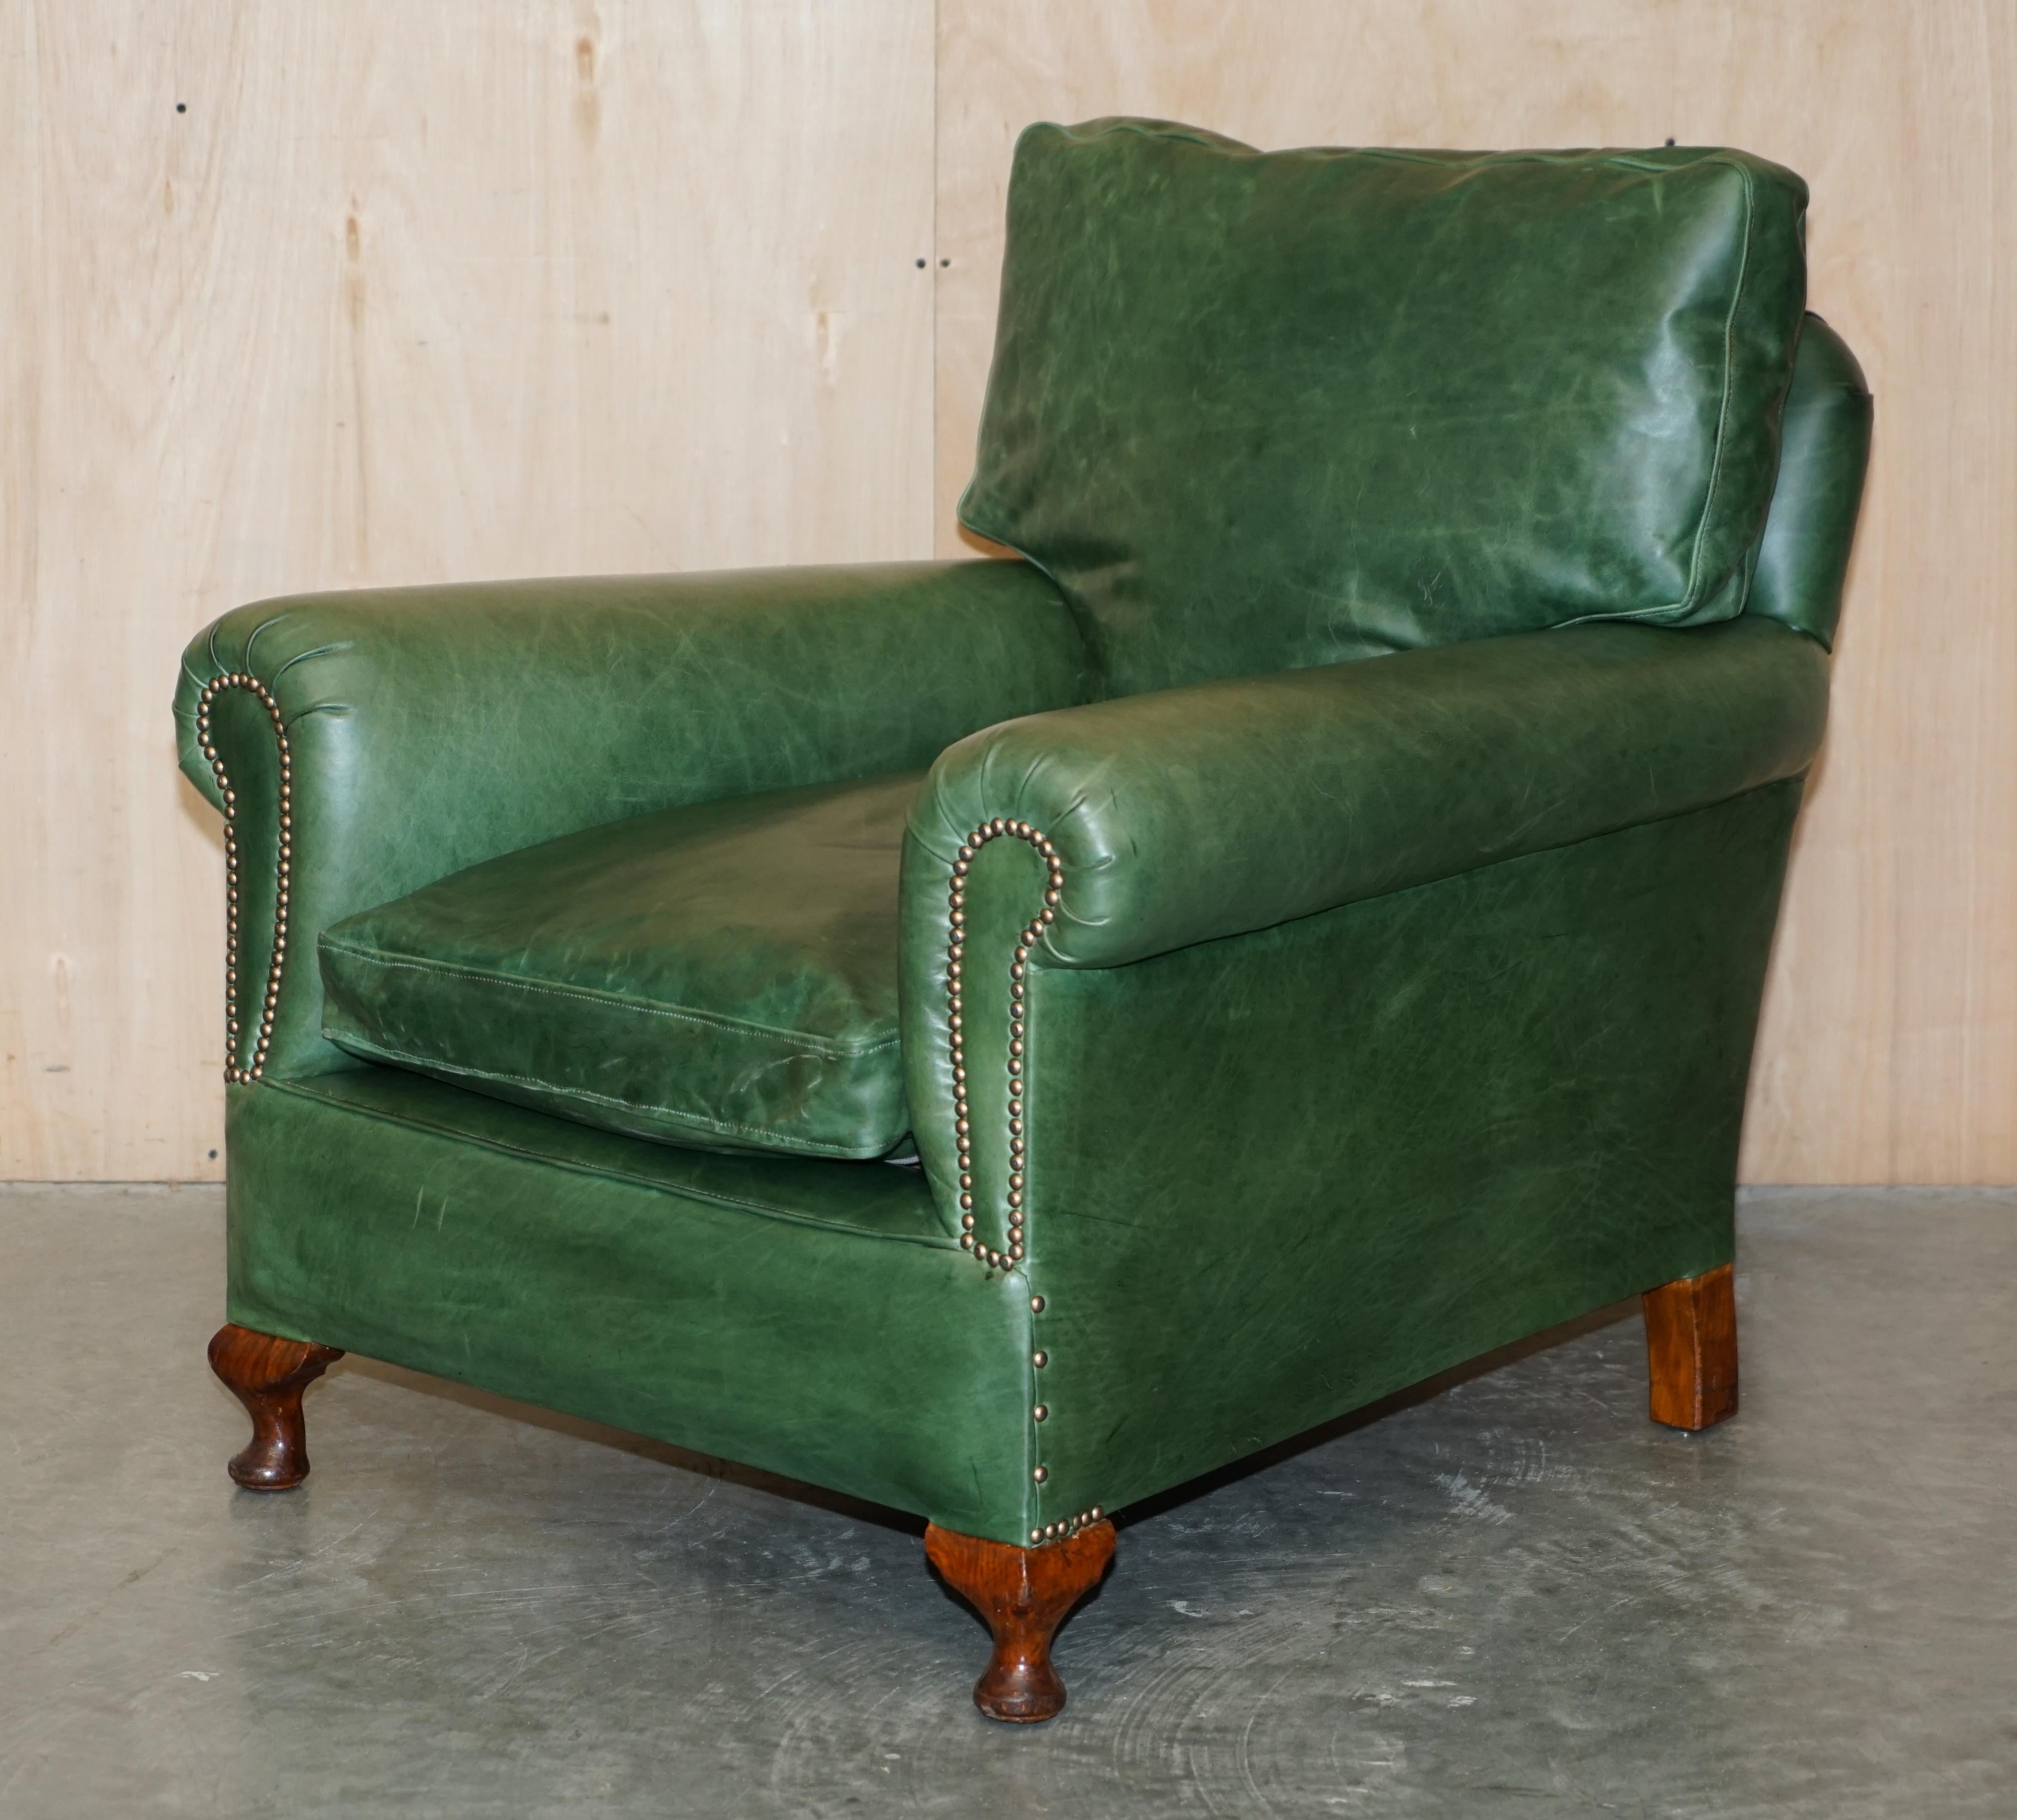 We are delighted to offer for sale this stunning pair of lightly restored, hand dyed Heritage green leather, club armchairs with lovely elegant Cabriolet legs

An exceptionally good looking well-made and substantial armchairs. They are upholstered